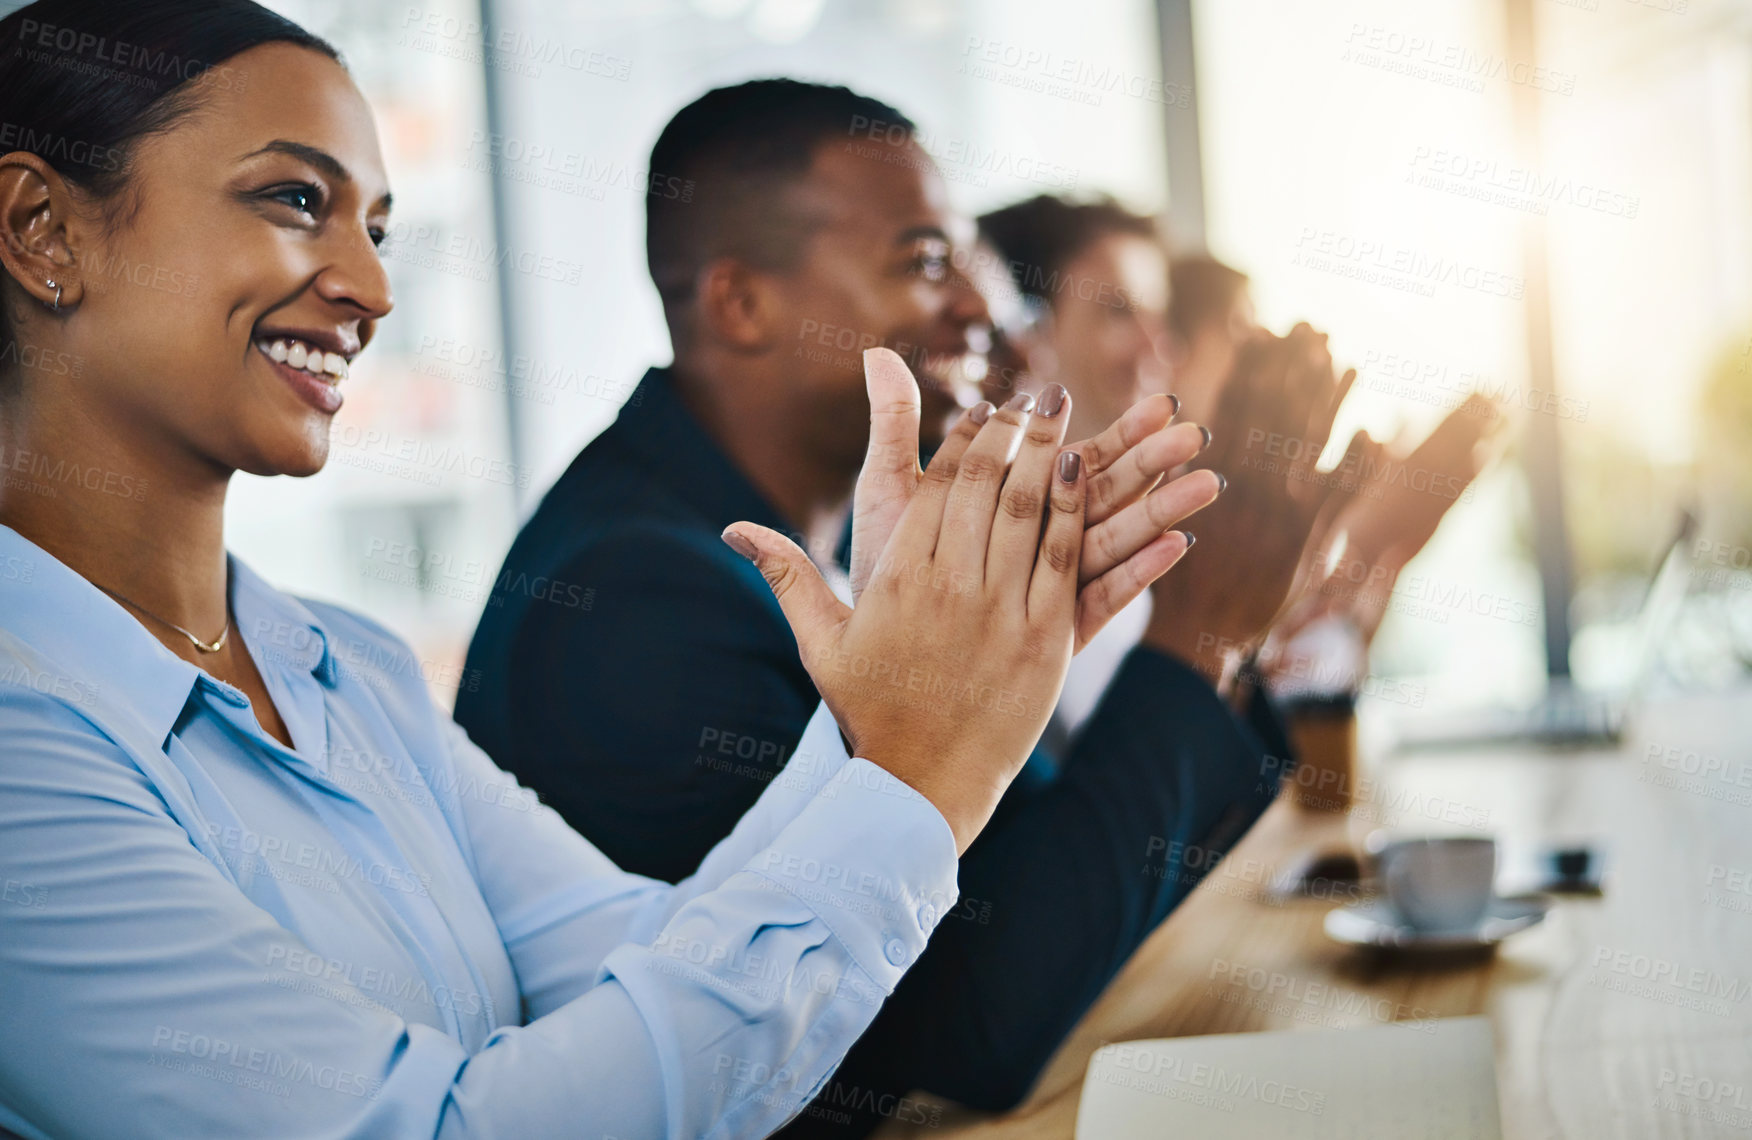 Buy stock photo Cropped shot of a group of young businesspeople applauding while sitting in the conference room during a seminar